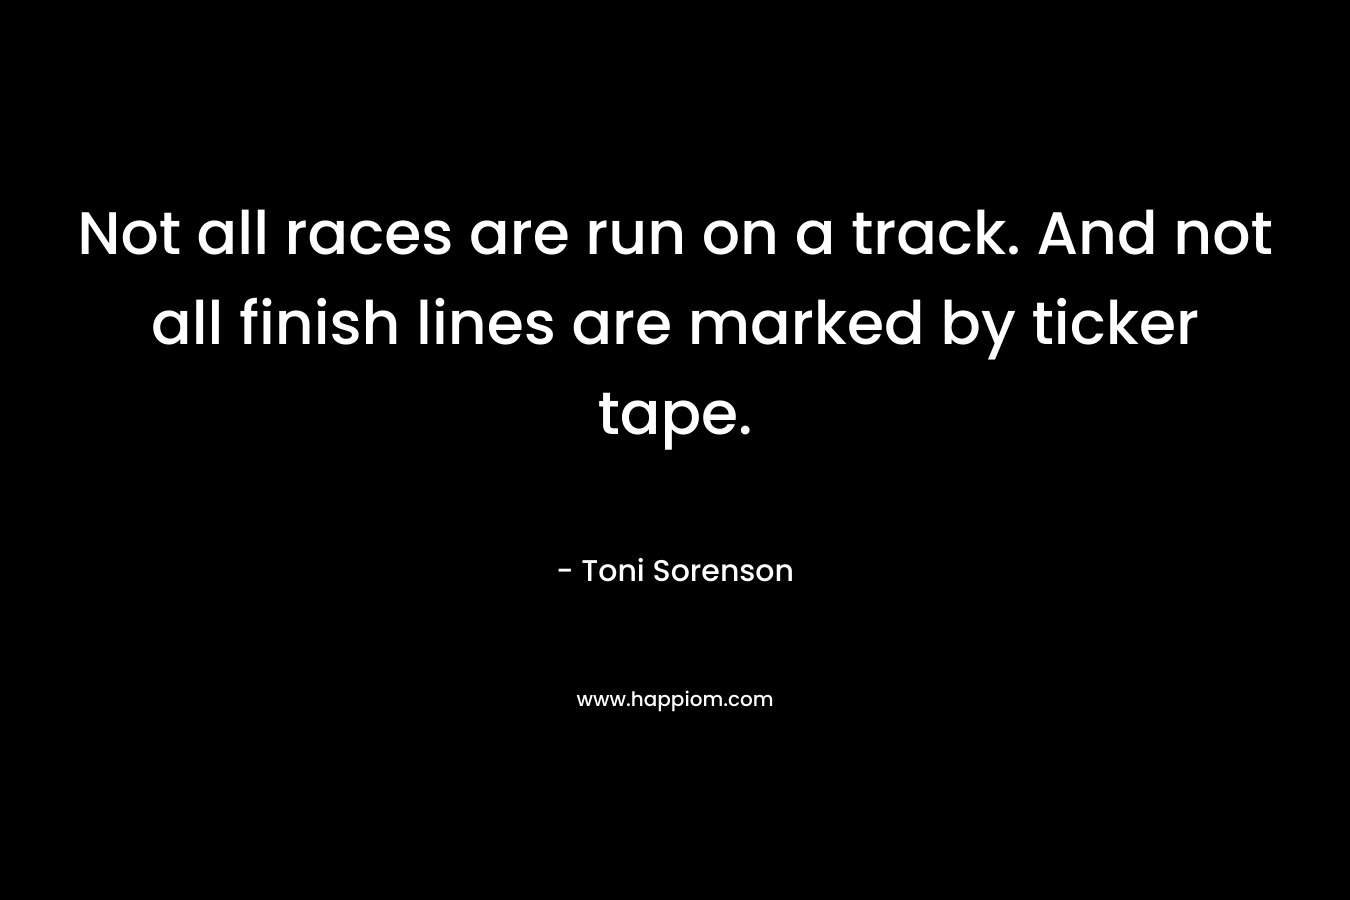 Not all races are run on a track. And not all finish lines are marked by ticker tape. – Toni Sorenson